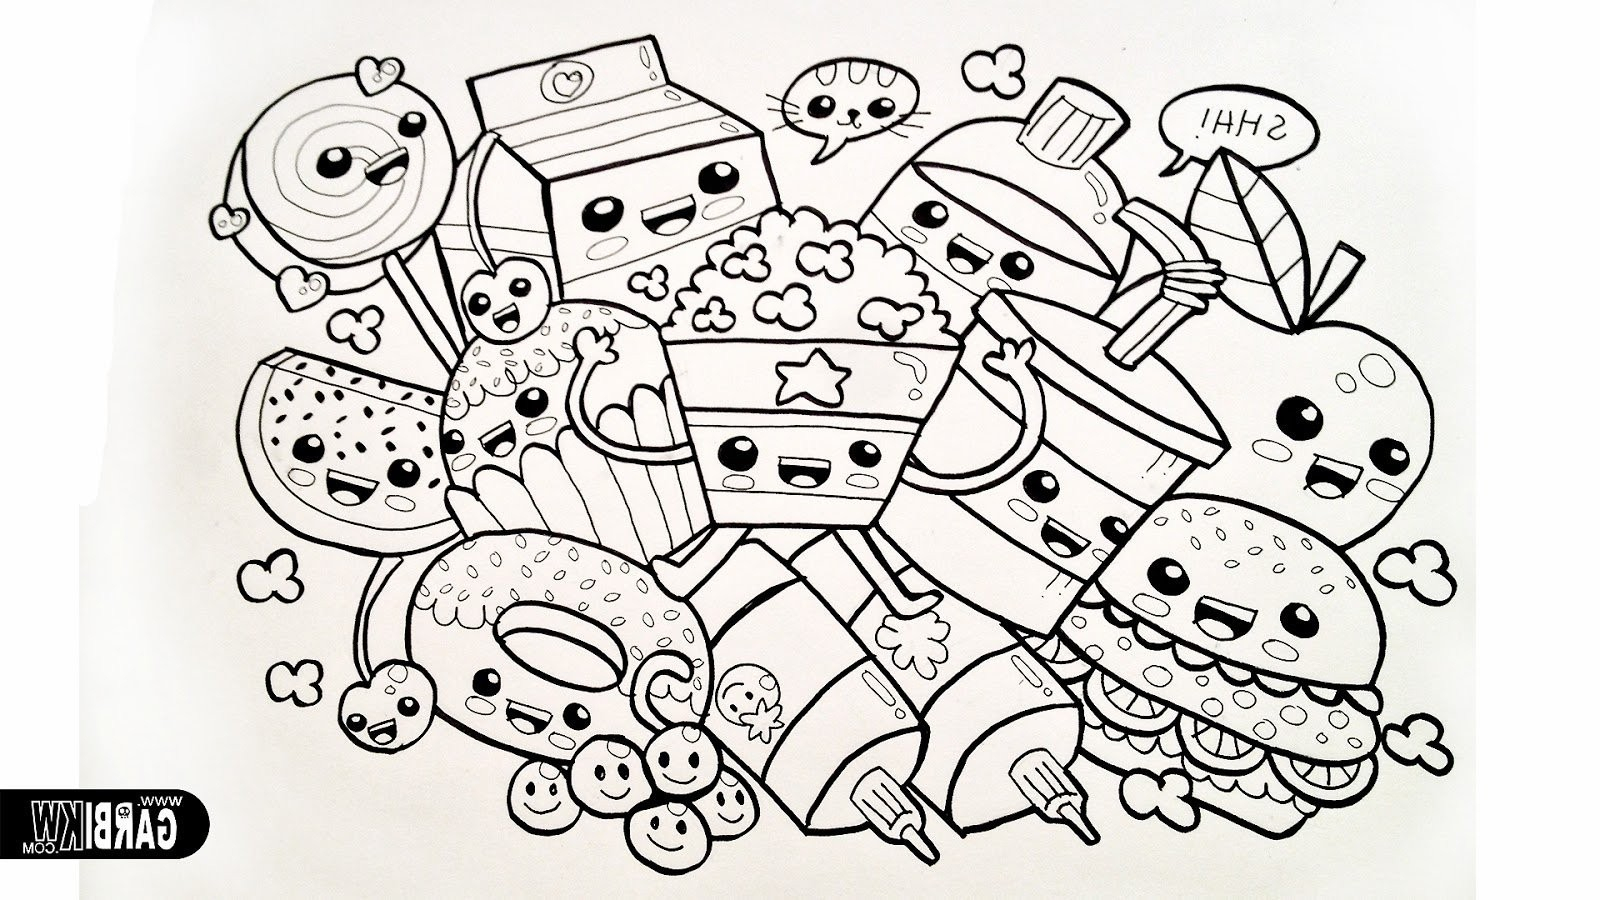 Kawaii Coloring Pages Coloring Awesome Kawaii Coloring Sheets Pages To Download And